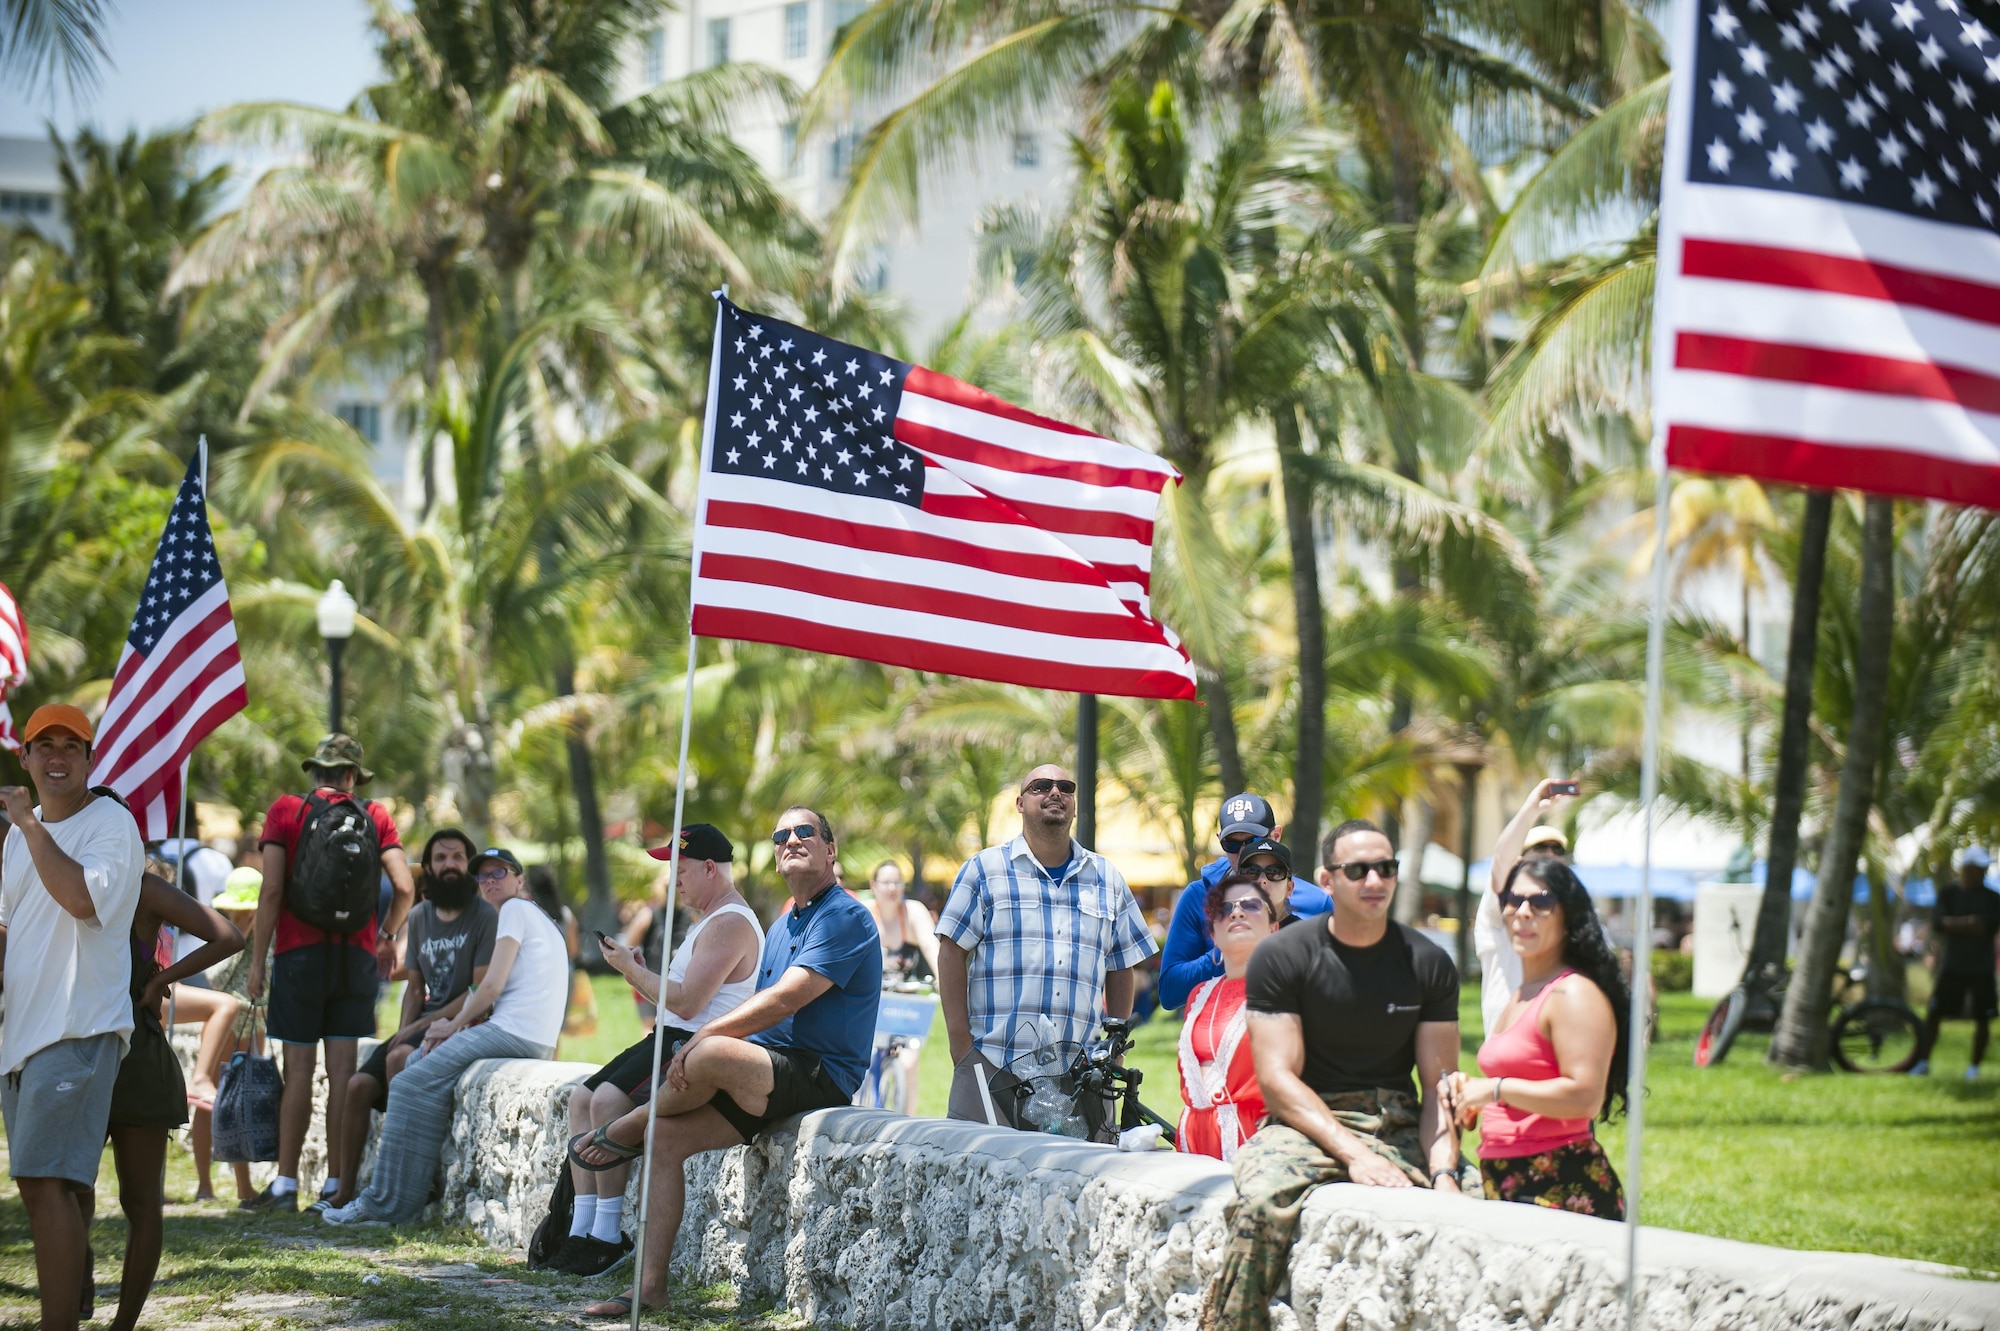 Spectators view an aerial demonstration during the National Salute to America’s Heroes Air and Sea Show, May 28, 2017, at Miami Beach, Fla. Top tier U.S. military assets assembled in Miami to showcase air superiority while honoring those who have made the ultimate sacrifice during the Memorial Day weekend. (U.S. Air Force photo/Staff Sgt. Jared Trimarchi)